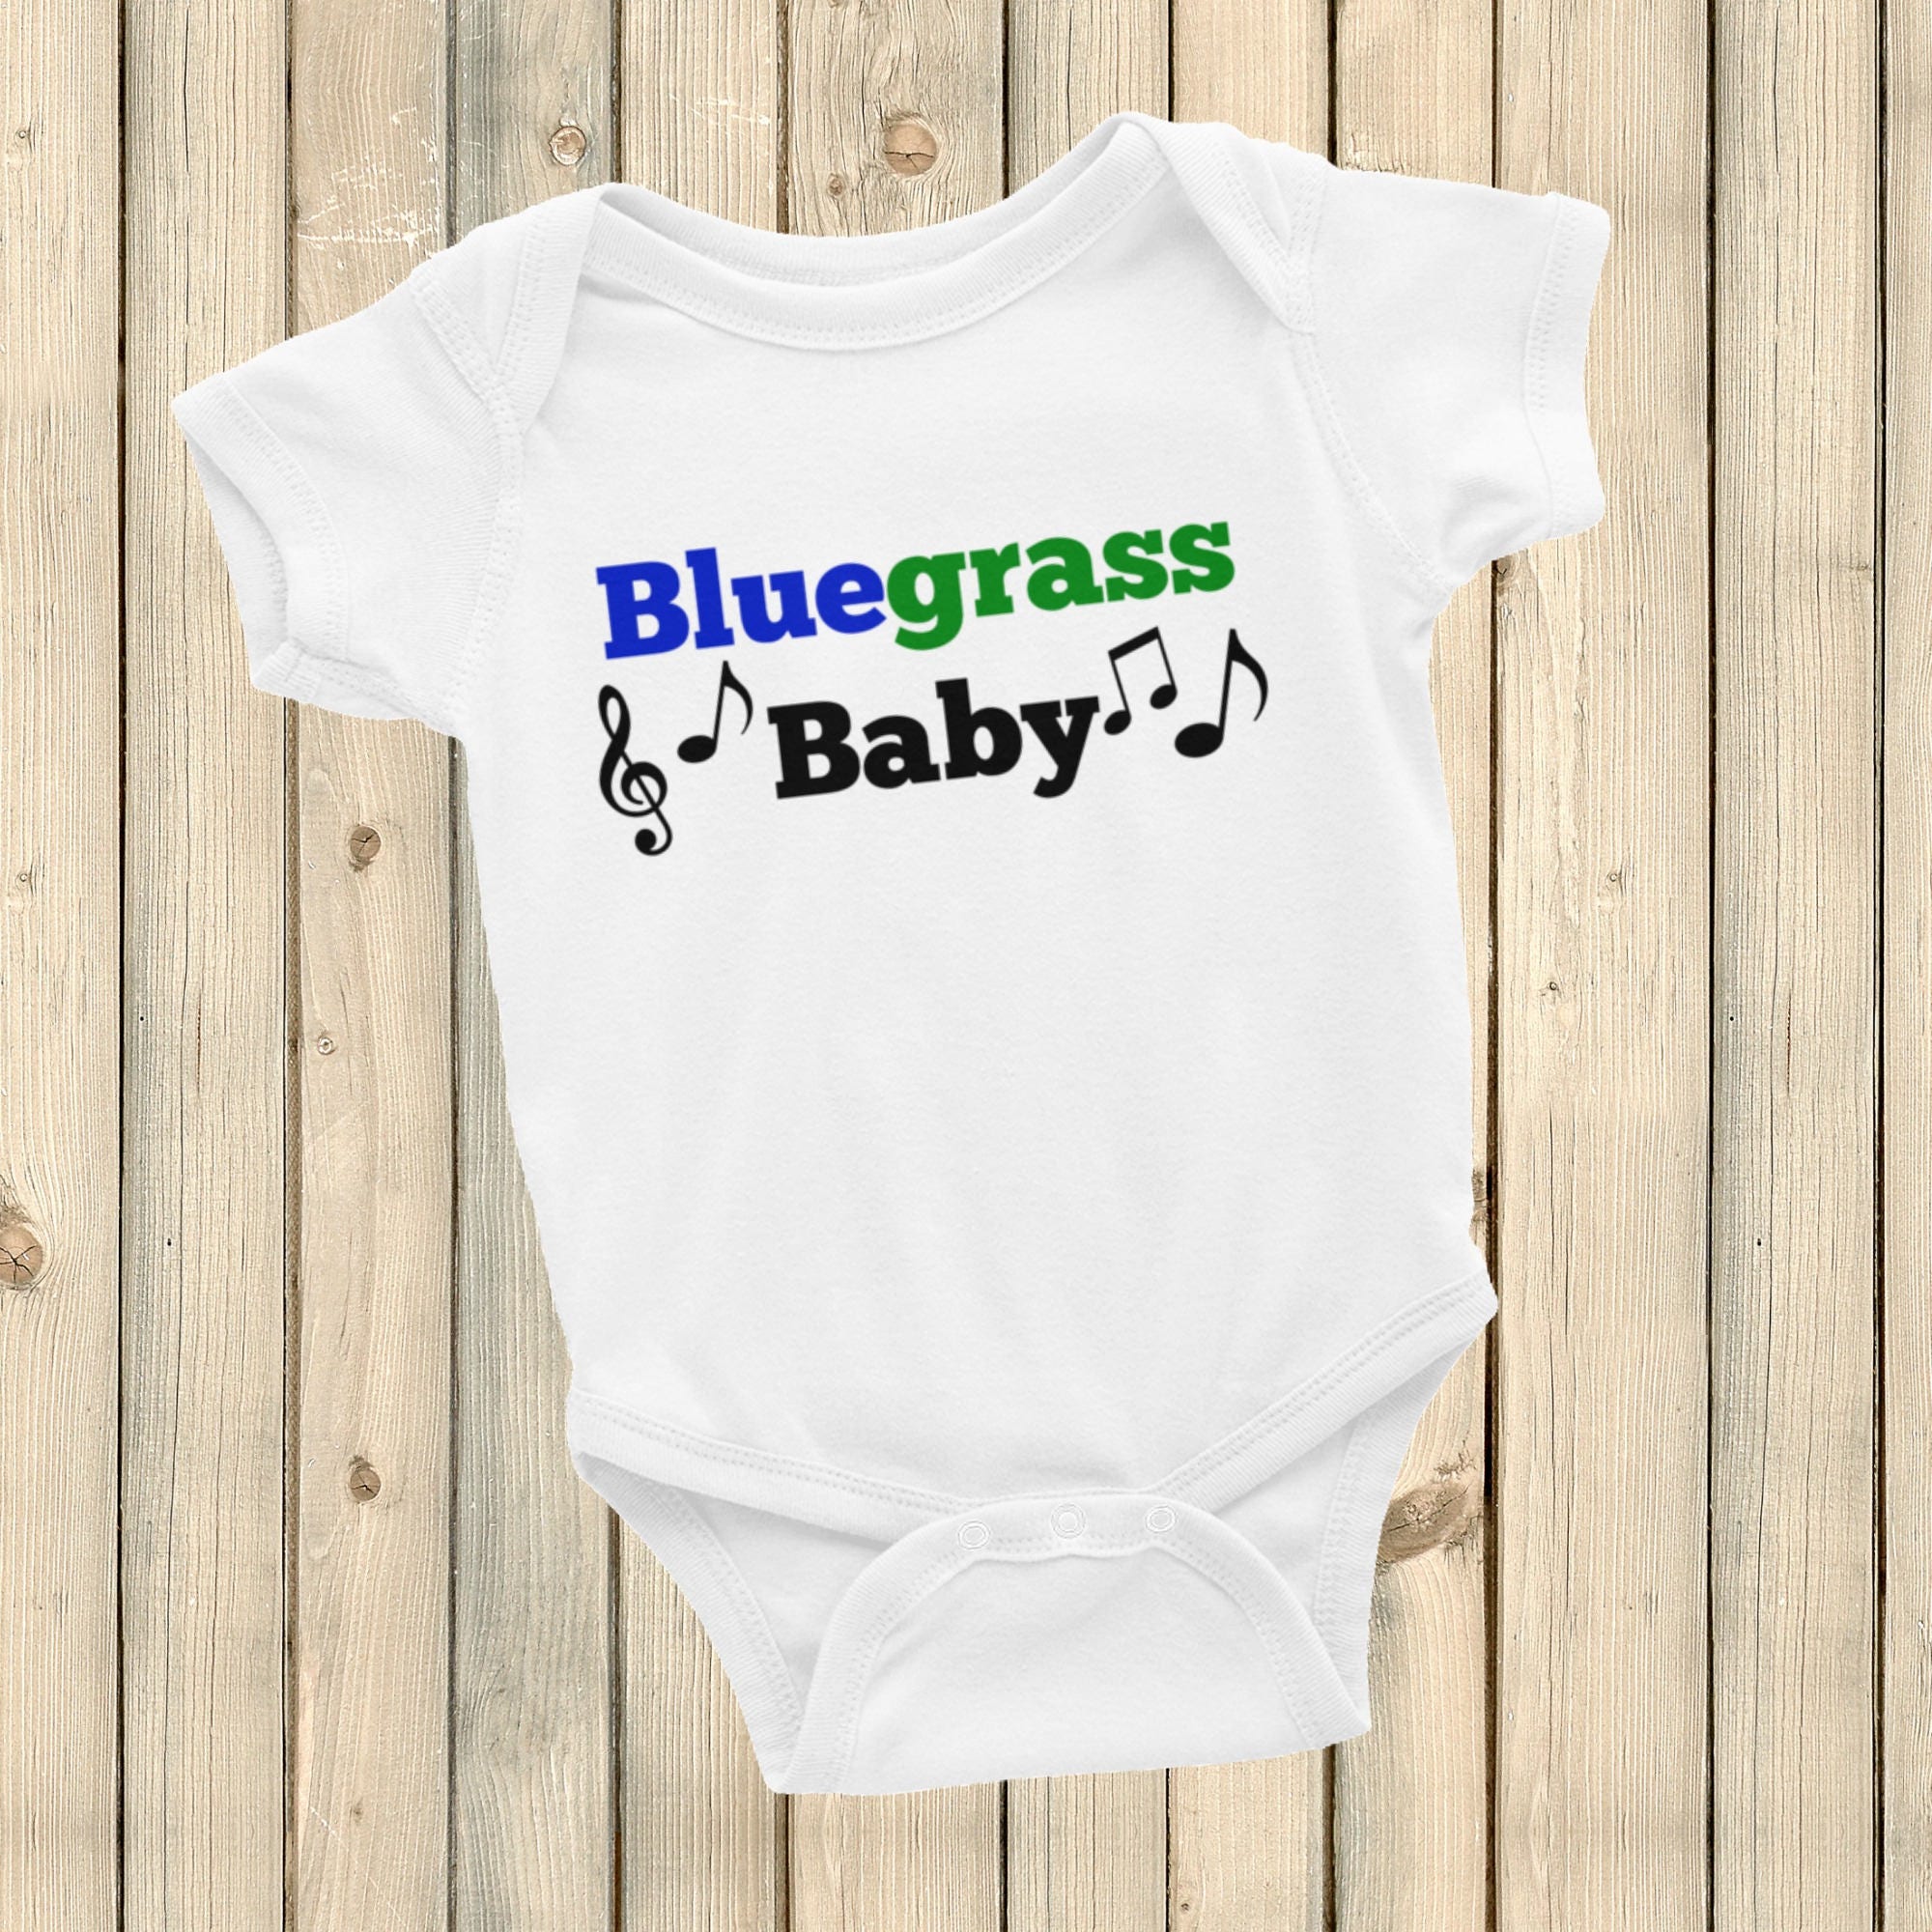 Bluegrass Baby Clothes & Shoes